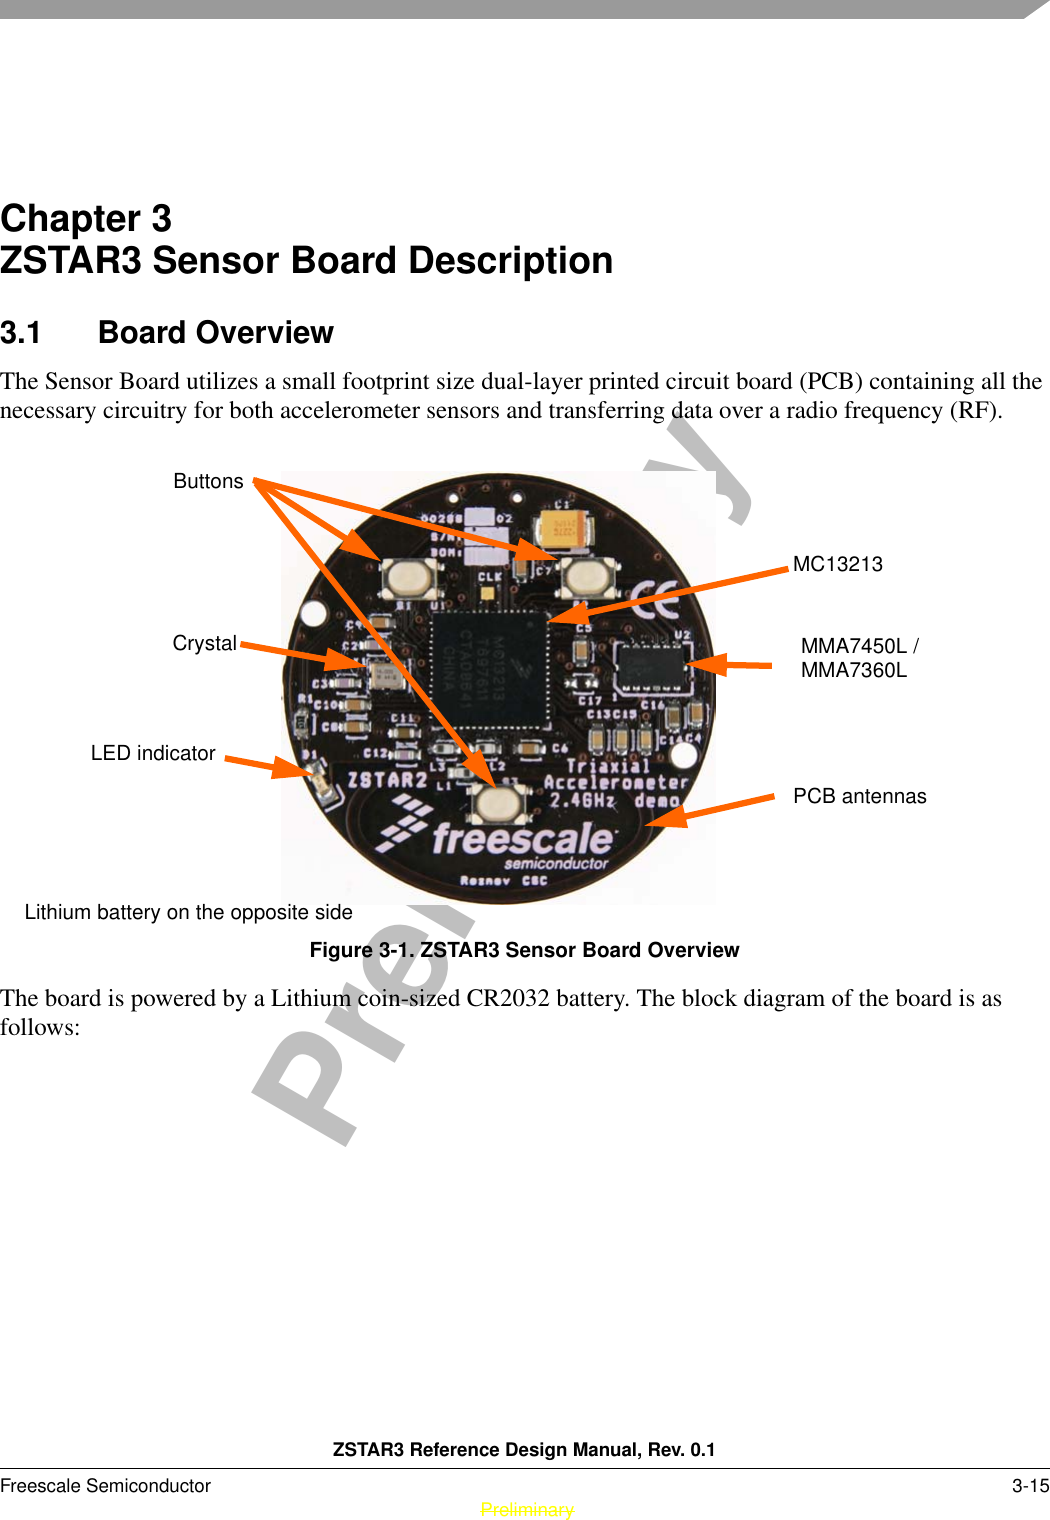 ZSTAR3 Reference Design Manual, Rev. 0.1Freescale Semiconductor 3-15 PreliminaryPreliminaryChapter 3  ZSTAR3 Sensor Board Description3.1 Board OverviewThe Sensor Board utilizes a small footprint size dual-layer printed circuit board (PCB) containing all the necessary circuitry for both accelerometer sensors and transferring data over a radio frequency (RF). Figure 3-1. ZSTAR3 Sensor Board OverviewThe board is powered by a Lithium coin-sized CR2032 battery. The block diagram of the board is as follows:Lithium battery on the opposite sideMC13213MMA7450L /LED indicatorPCB antennasButtonsMMA7360LCrystal